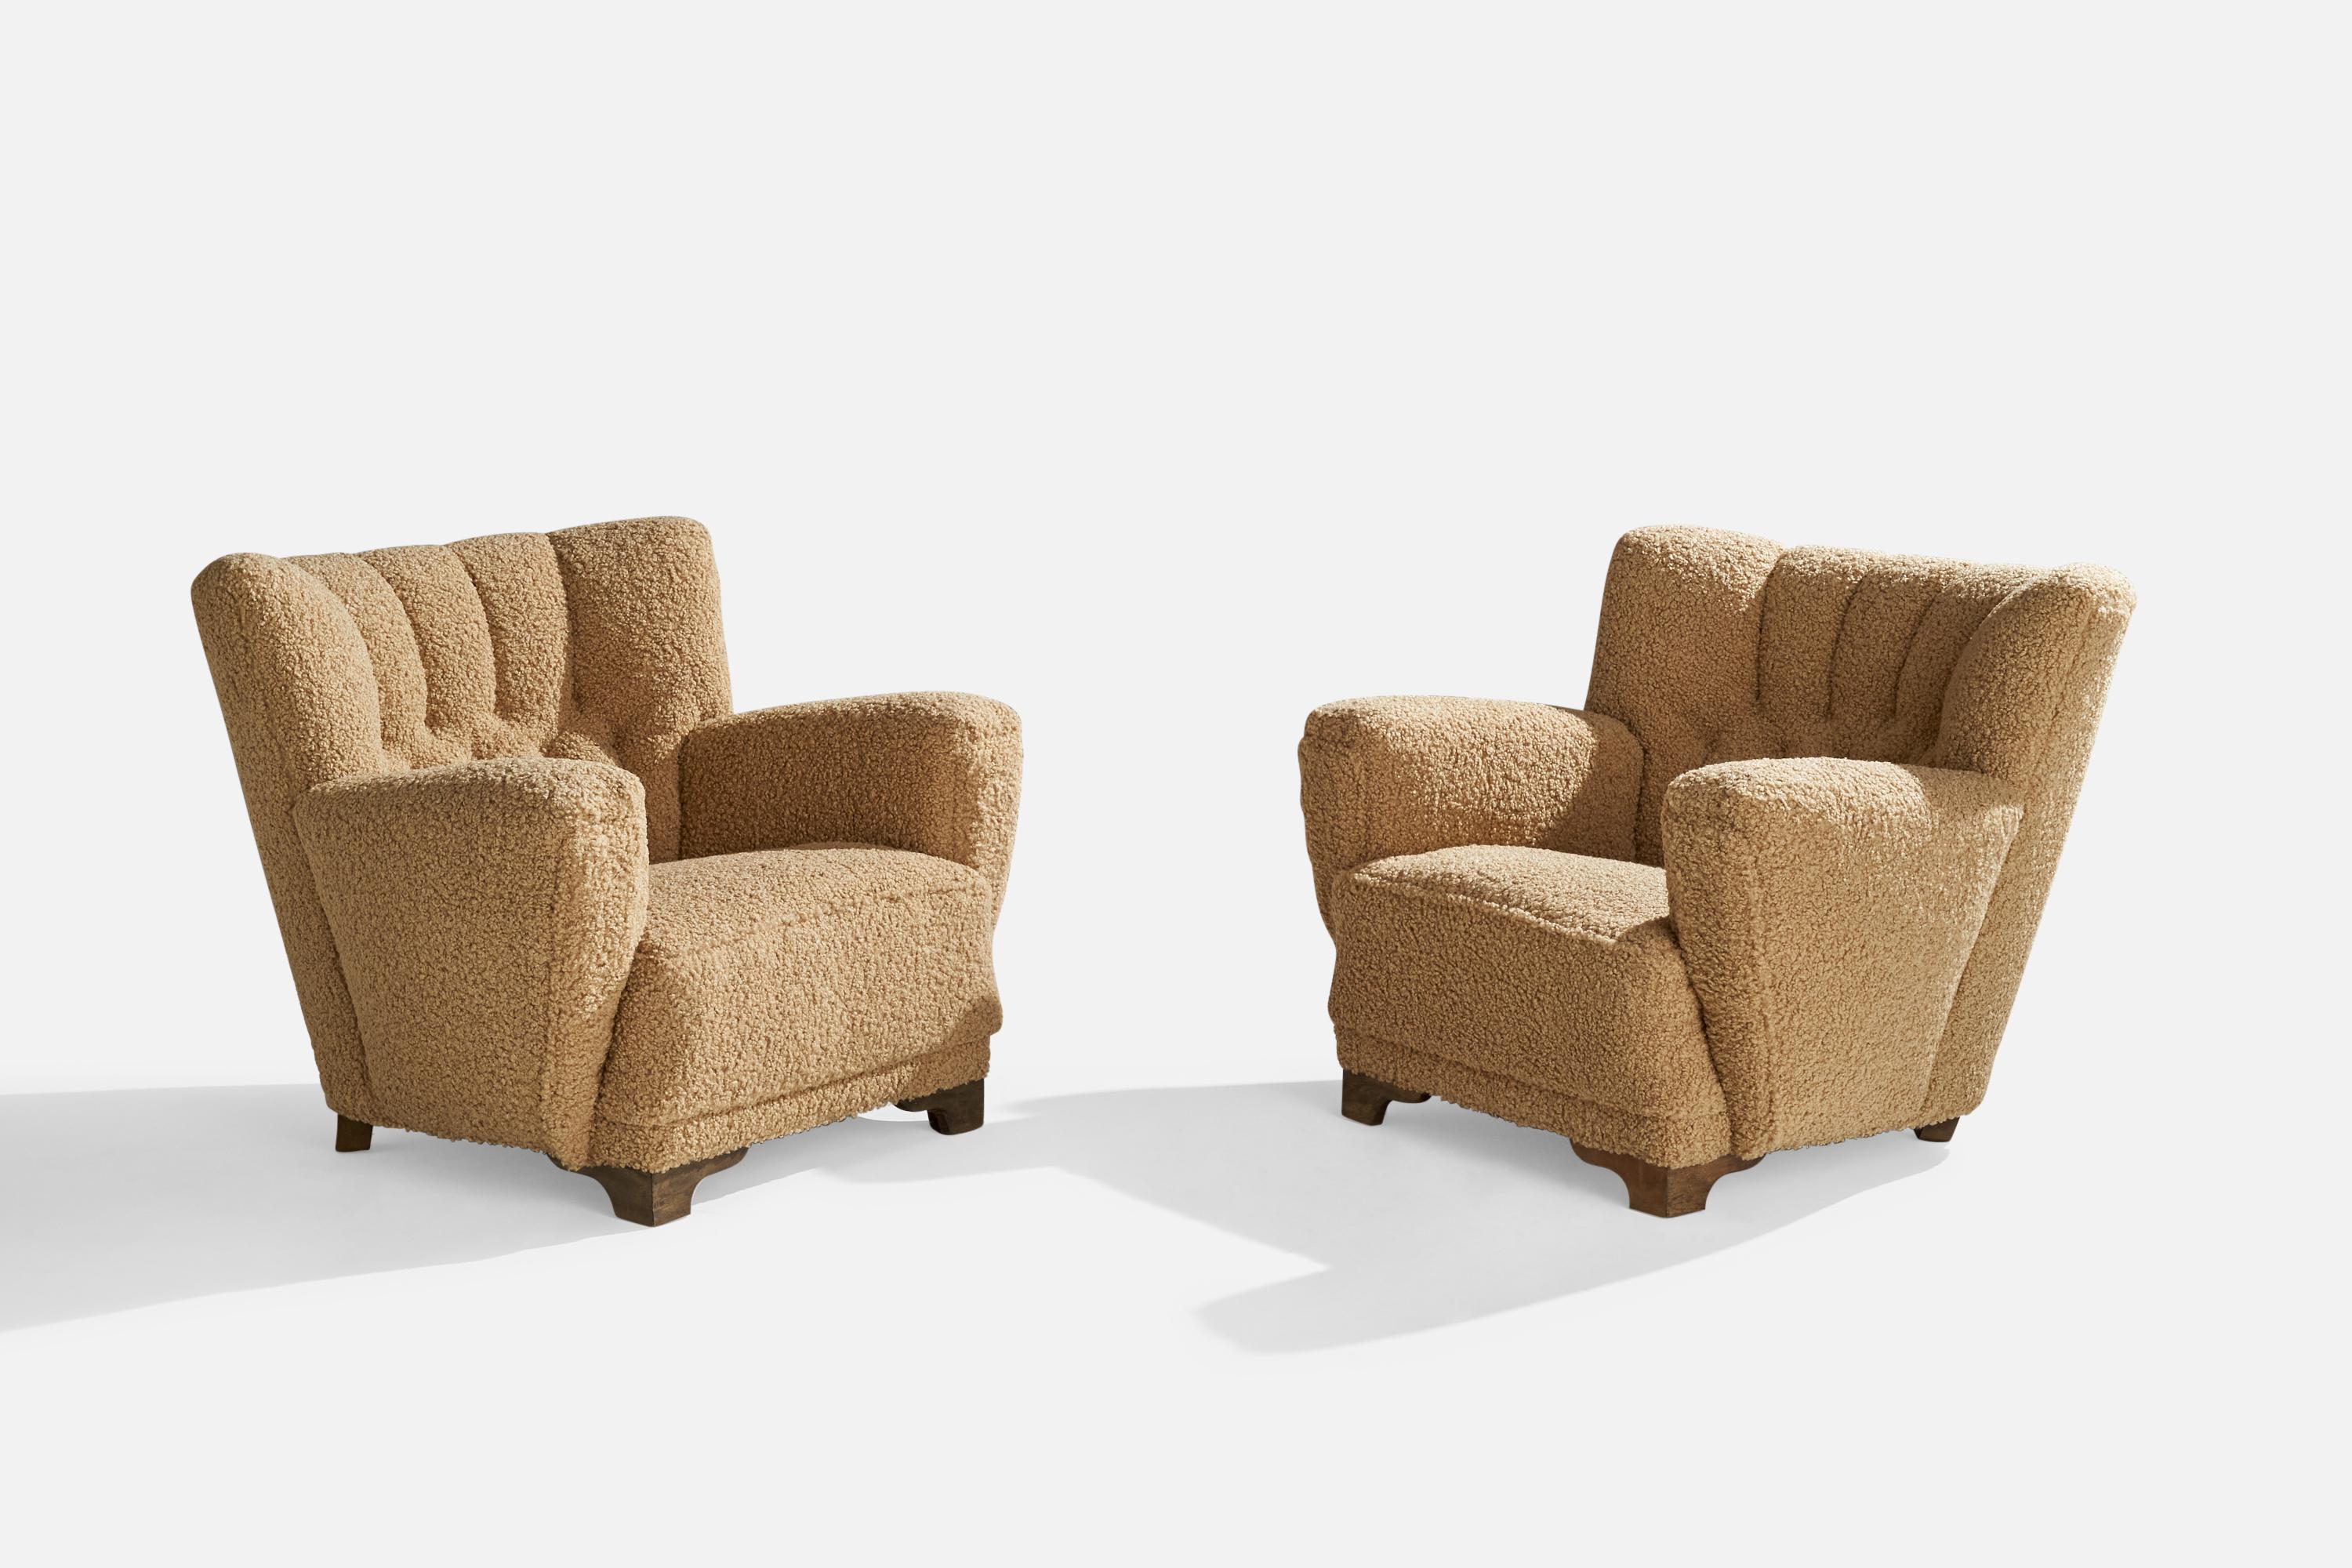 A pair of beige bouclé fabric and oak lounge chairs designed and produced in Denmark, 1940s.

Seat height 15.5”.